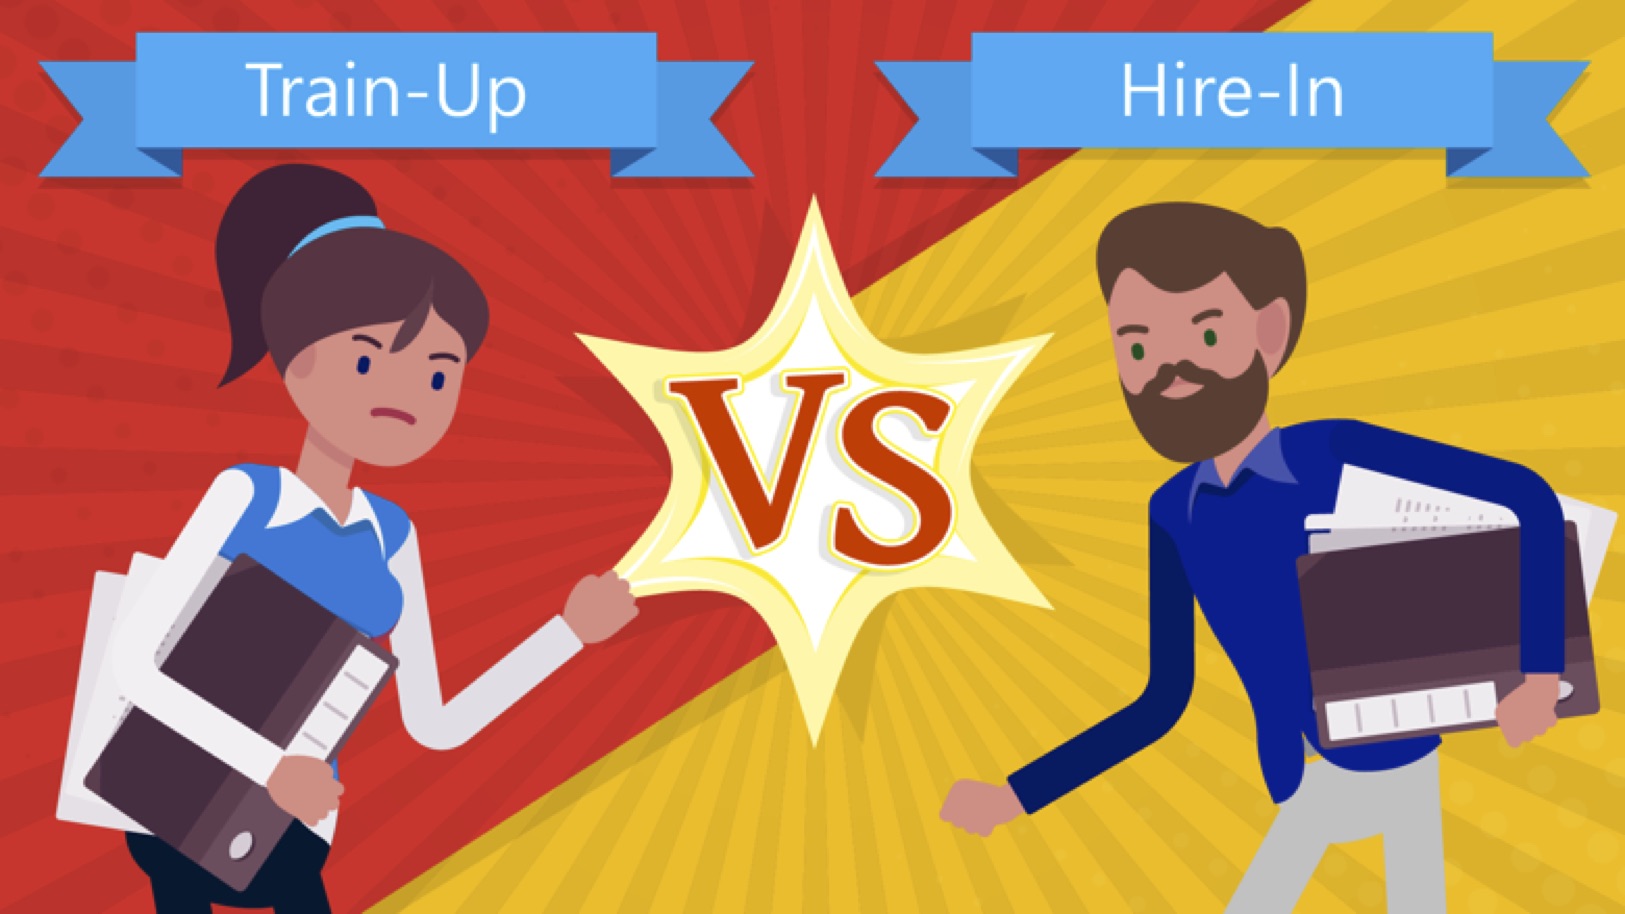 Train Or Hire: What Is Better For HR?